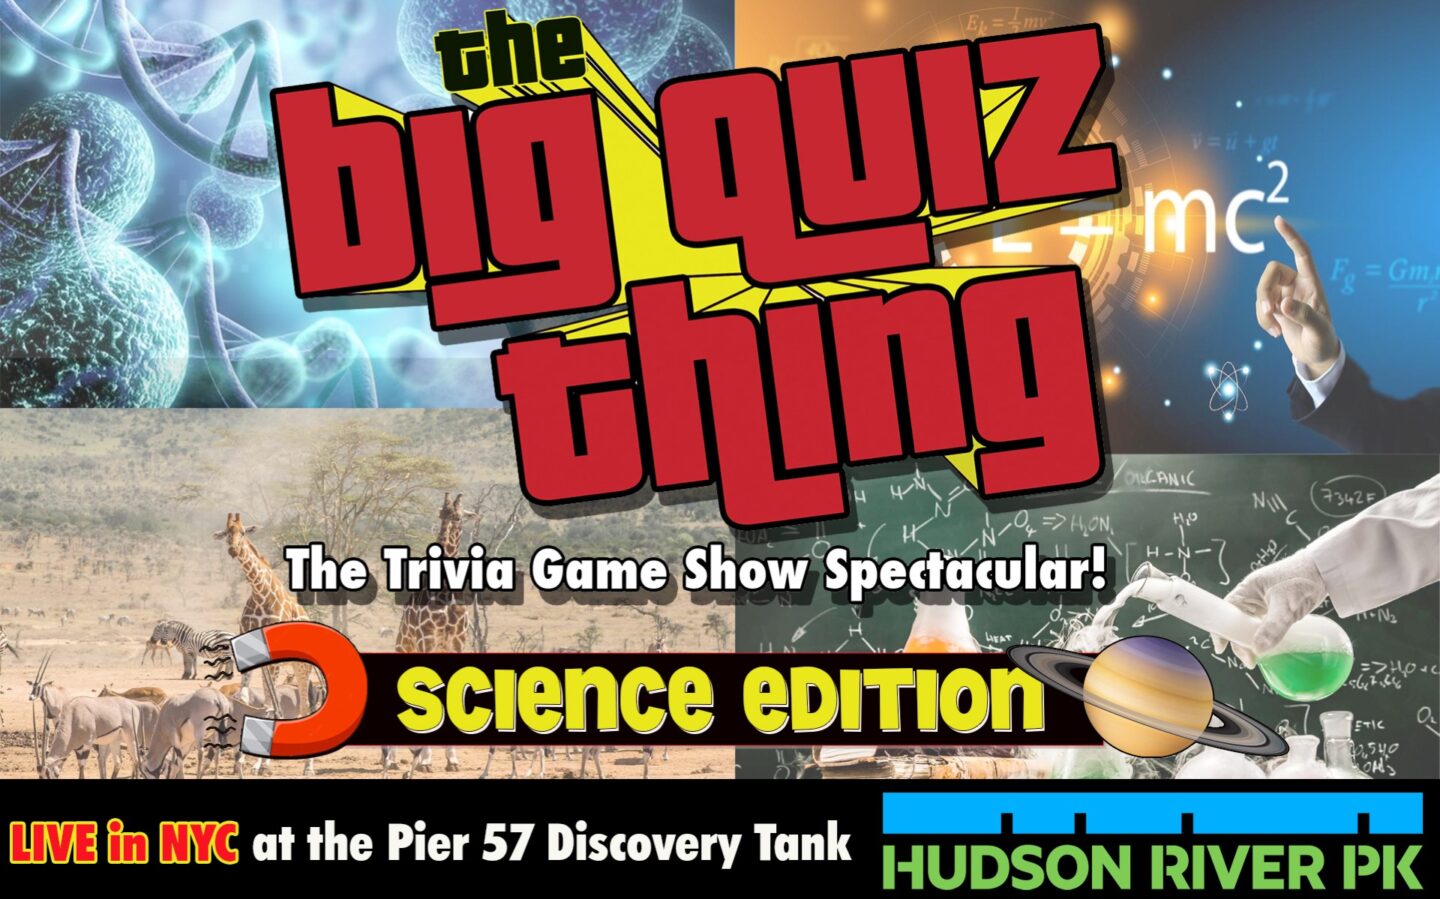 Collage of science-themed images with text overlaid. The text reads: "The Big Quiz Thing—The Trivia Game Show Spectacular! Science Edition—Live in NYC at the Pier 57 Discovery Tank"